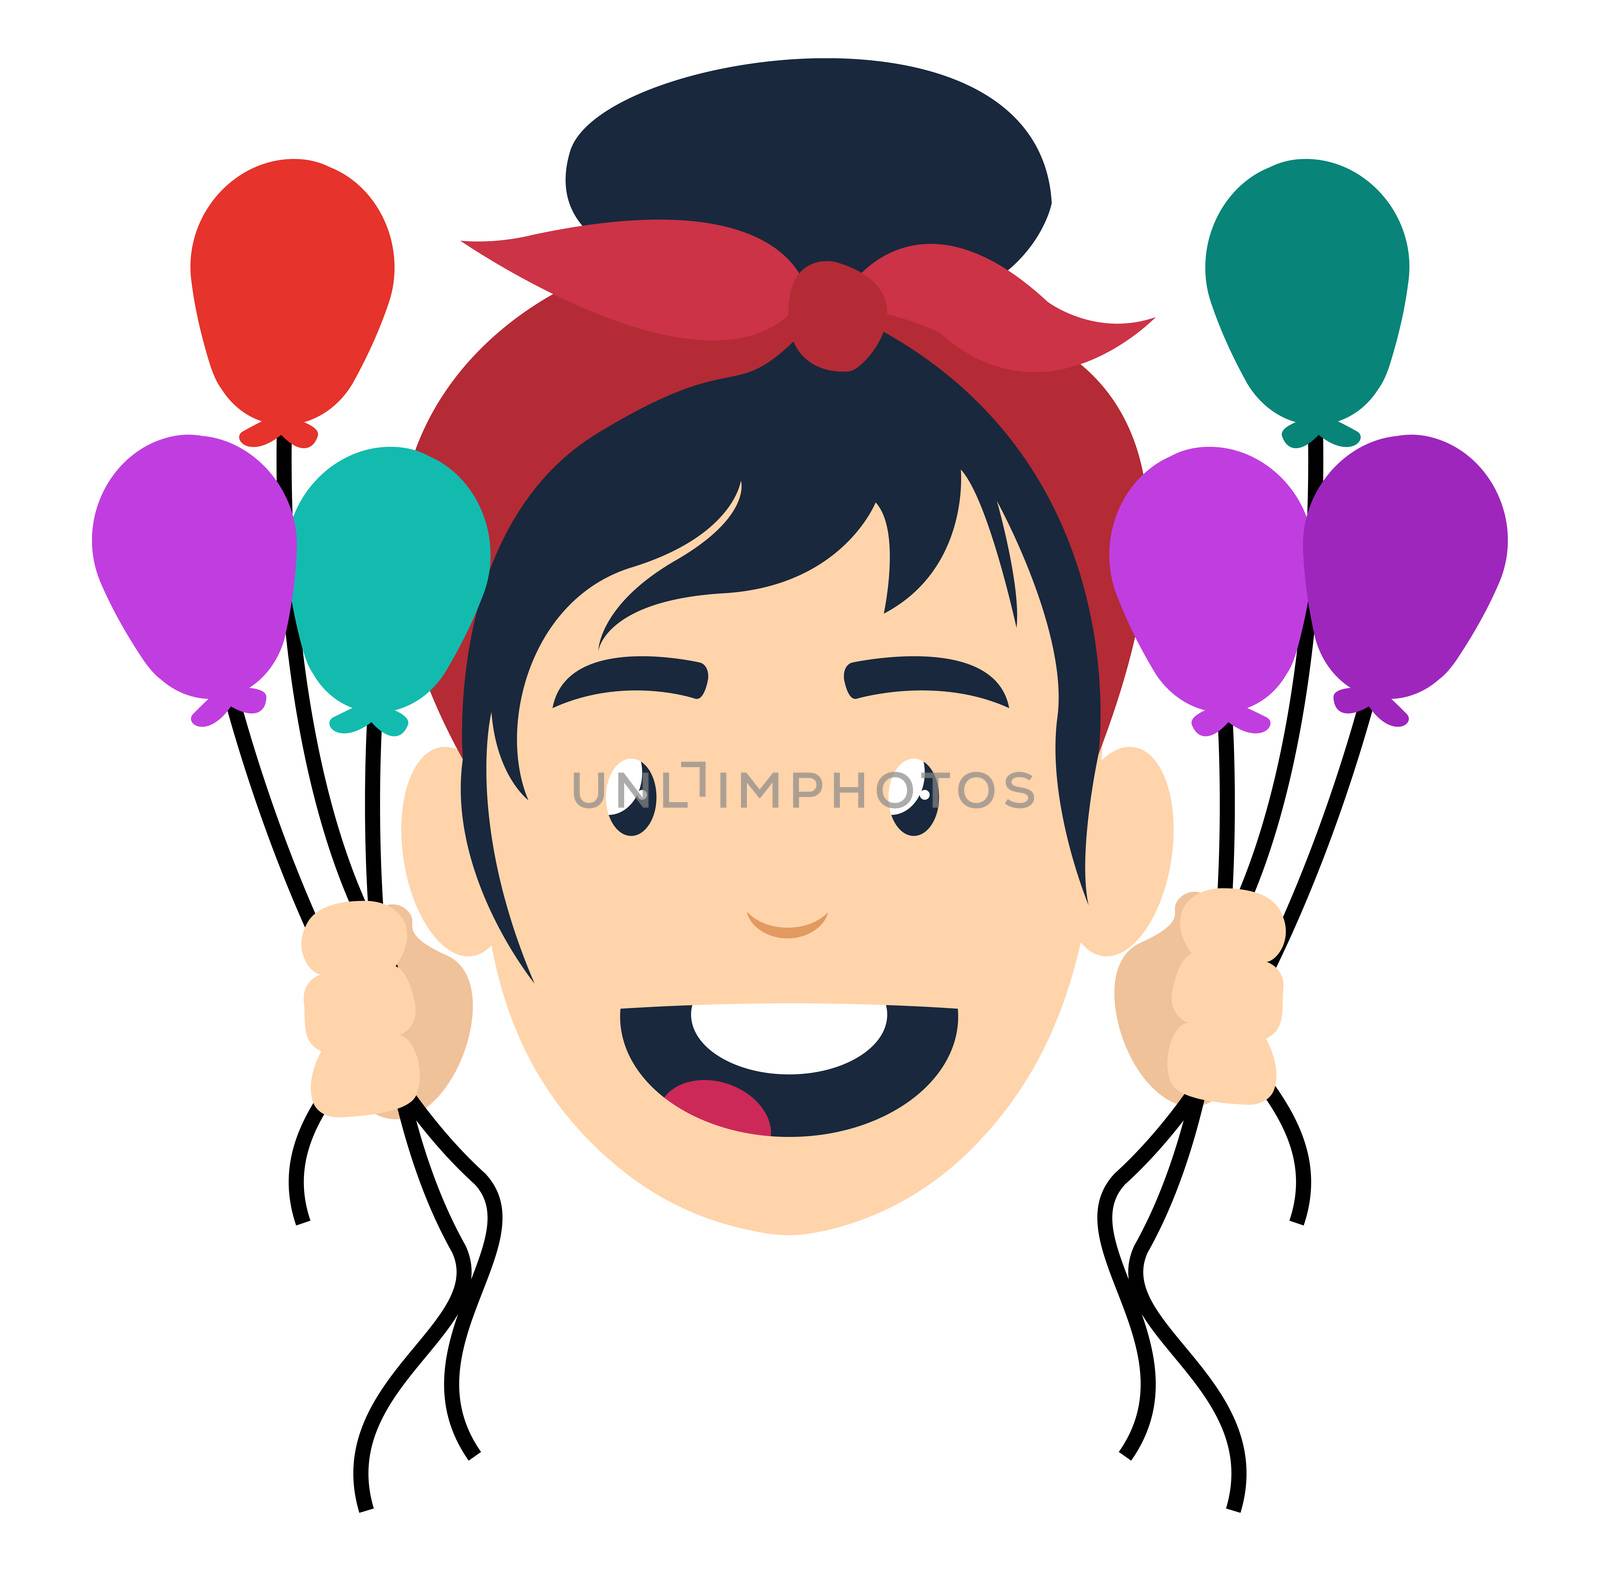 Girl with balloons, illustration, vector on white background